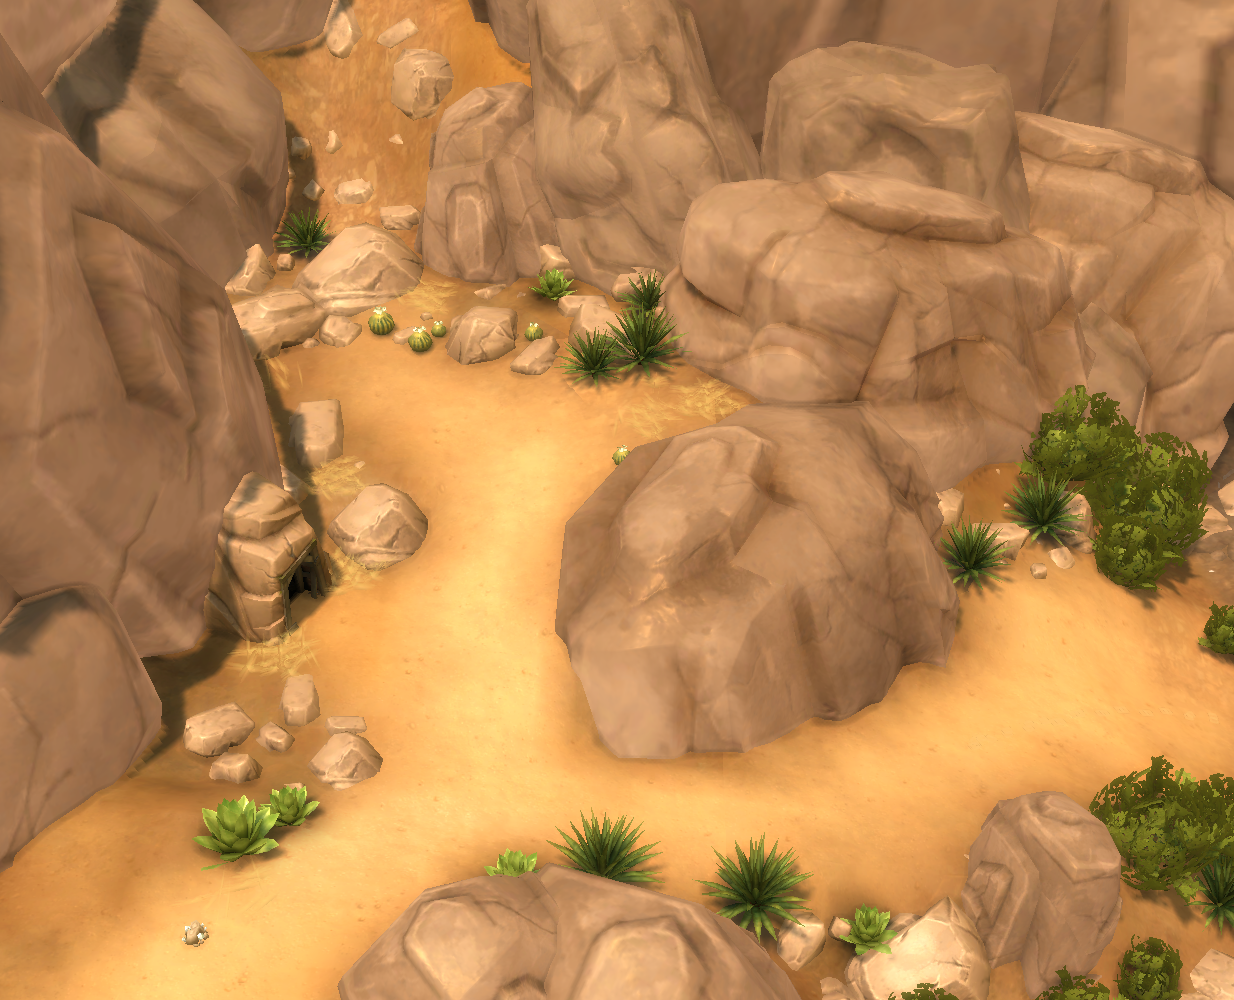 The Sims 4: Forgotten Grotto in Oasis Springs